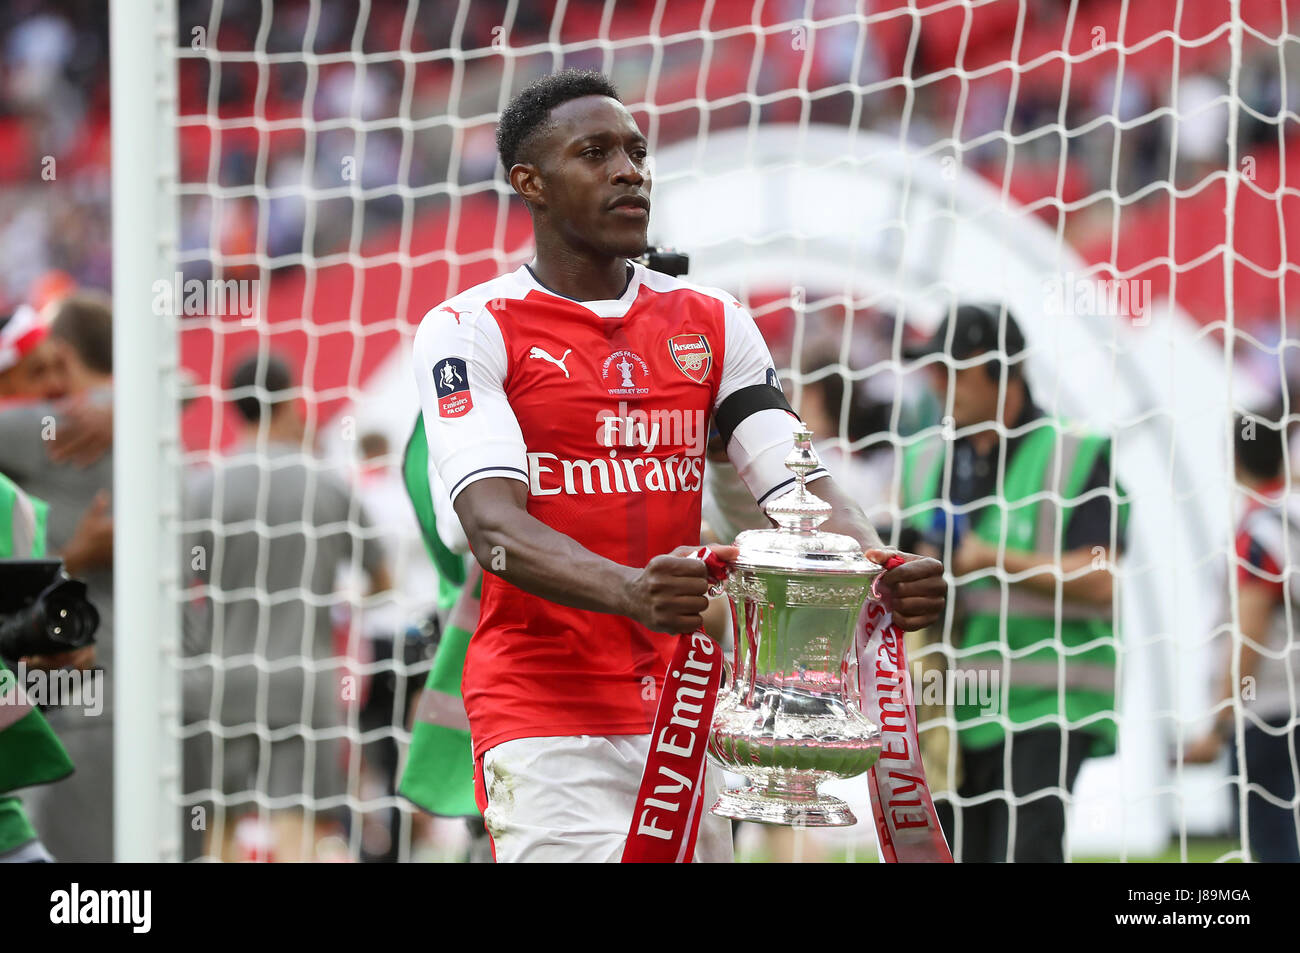 arsenals-danny-welbeck-celebrates-with-the-fa-cup-trophy-after-the-J89MGA.jpg